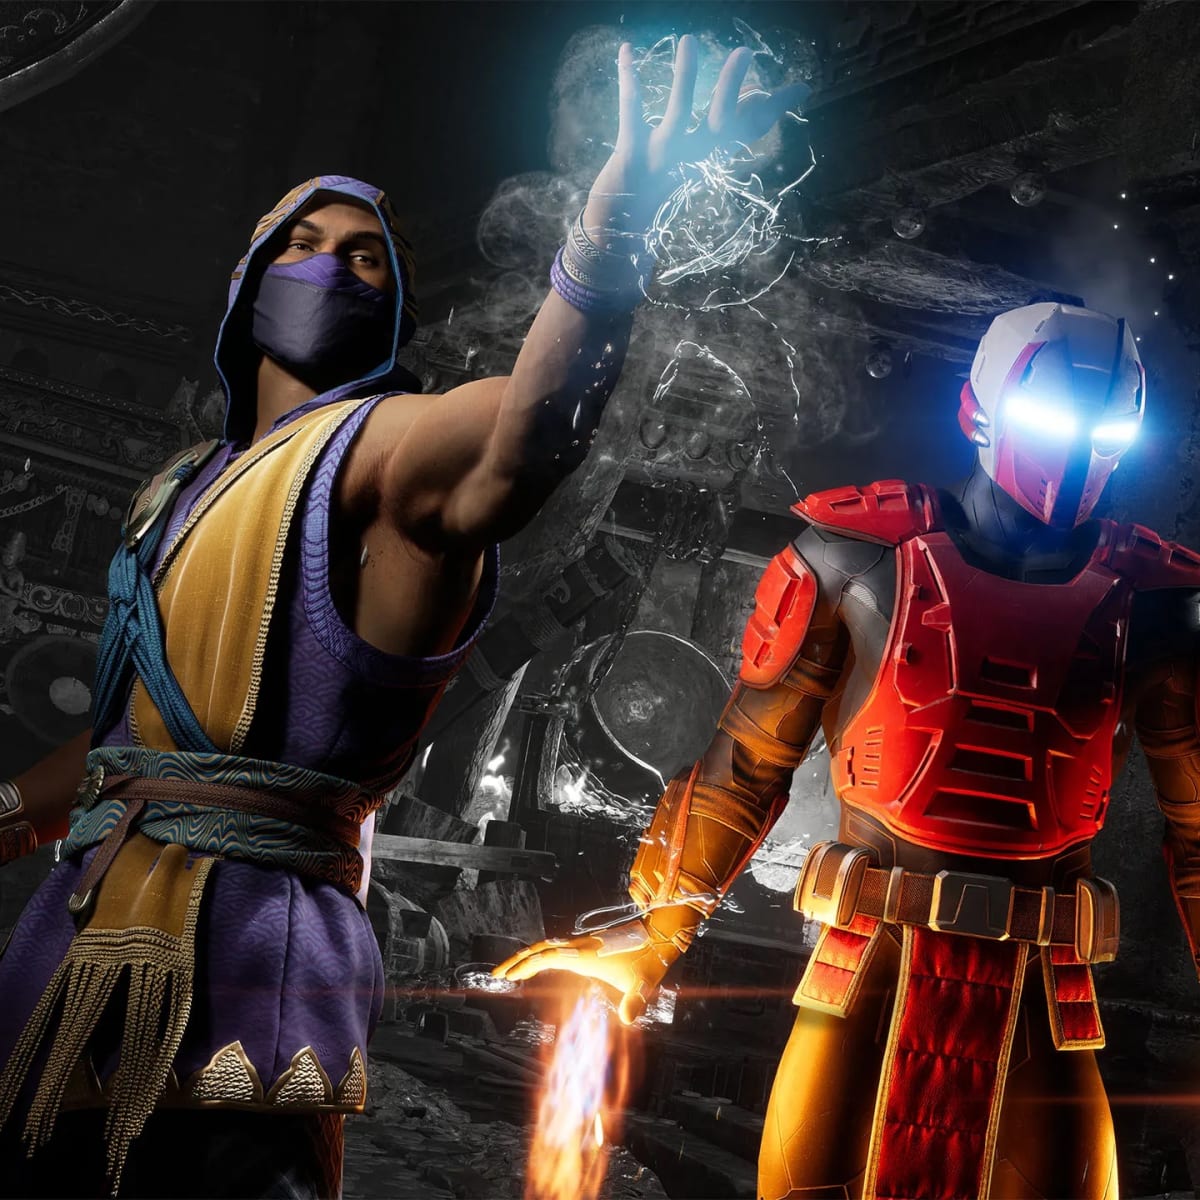 Baraka Mortal Kombat 11 Ultimate moves list, strategy guide, combos and  character overview